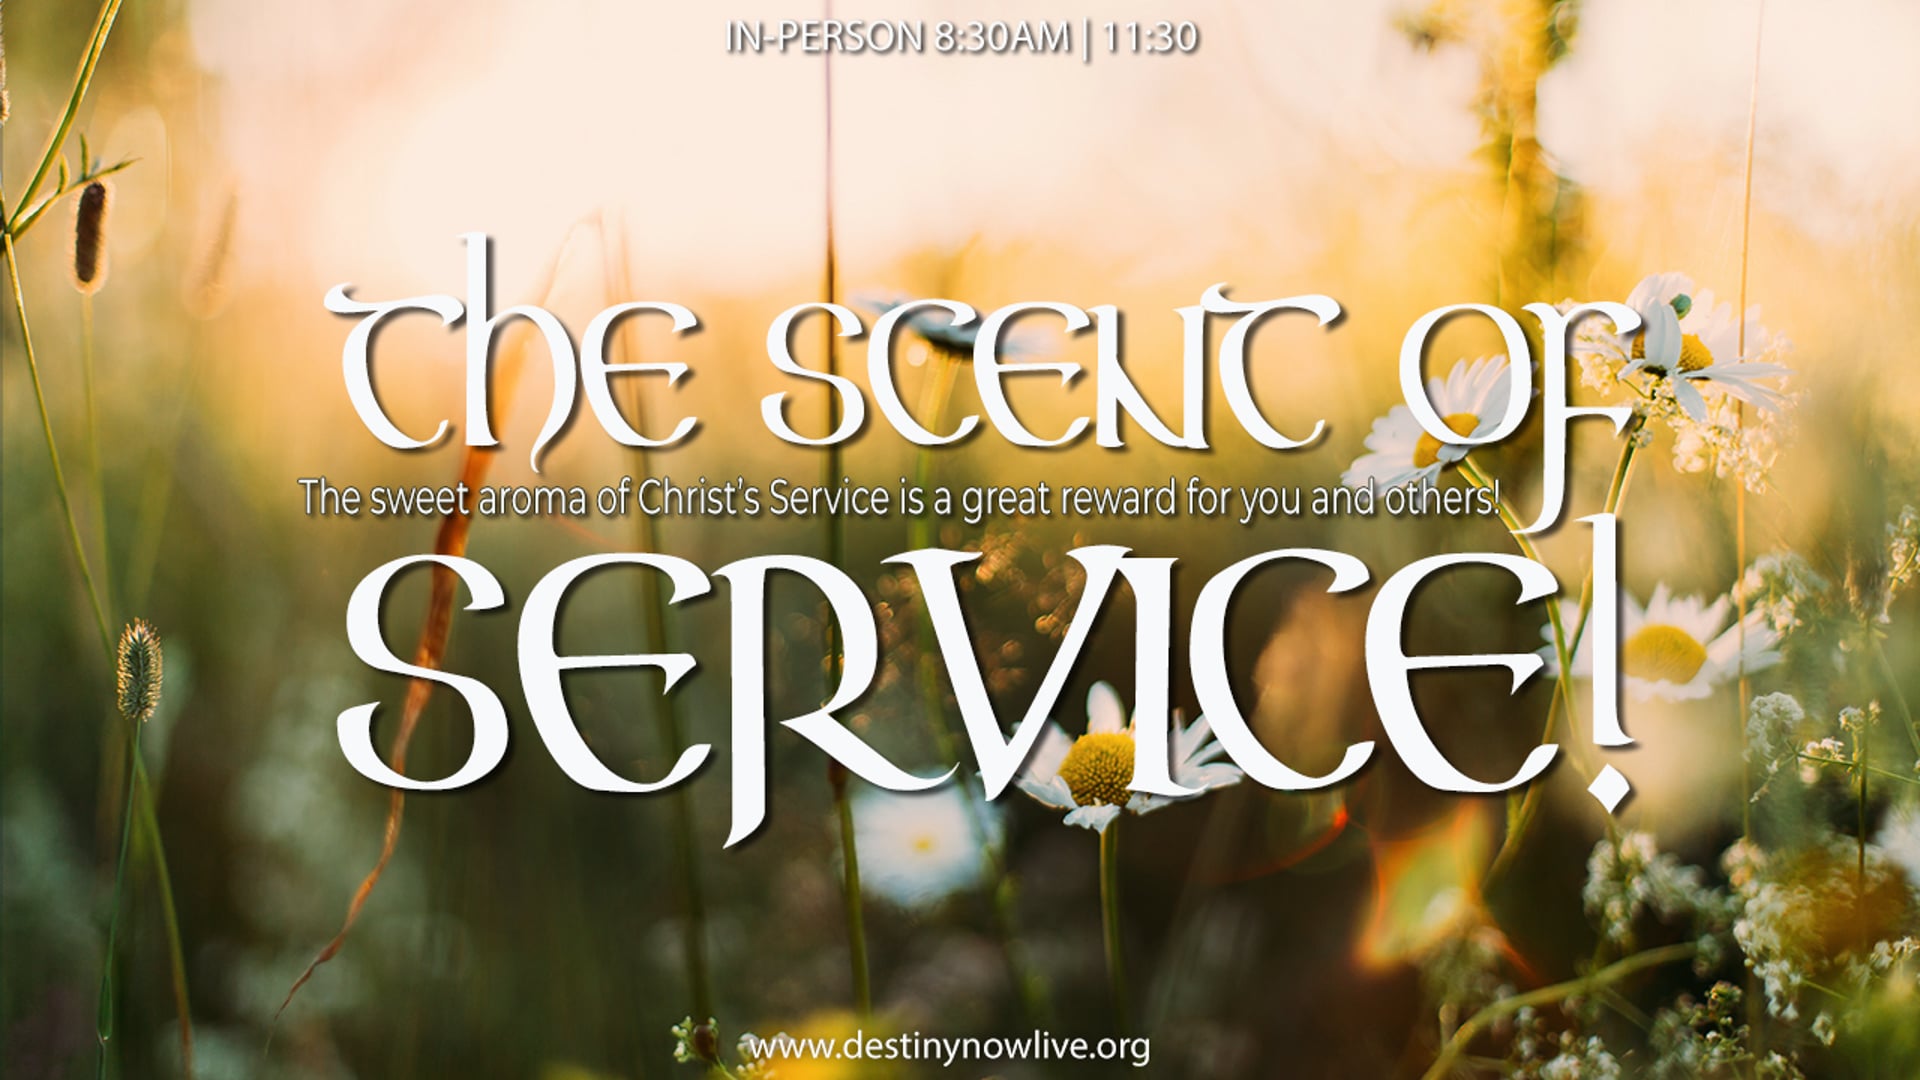 THE SCENT OF SERVICE